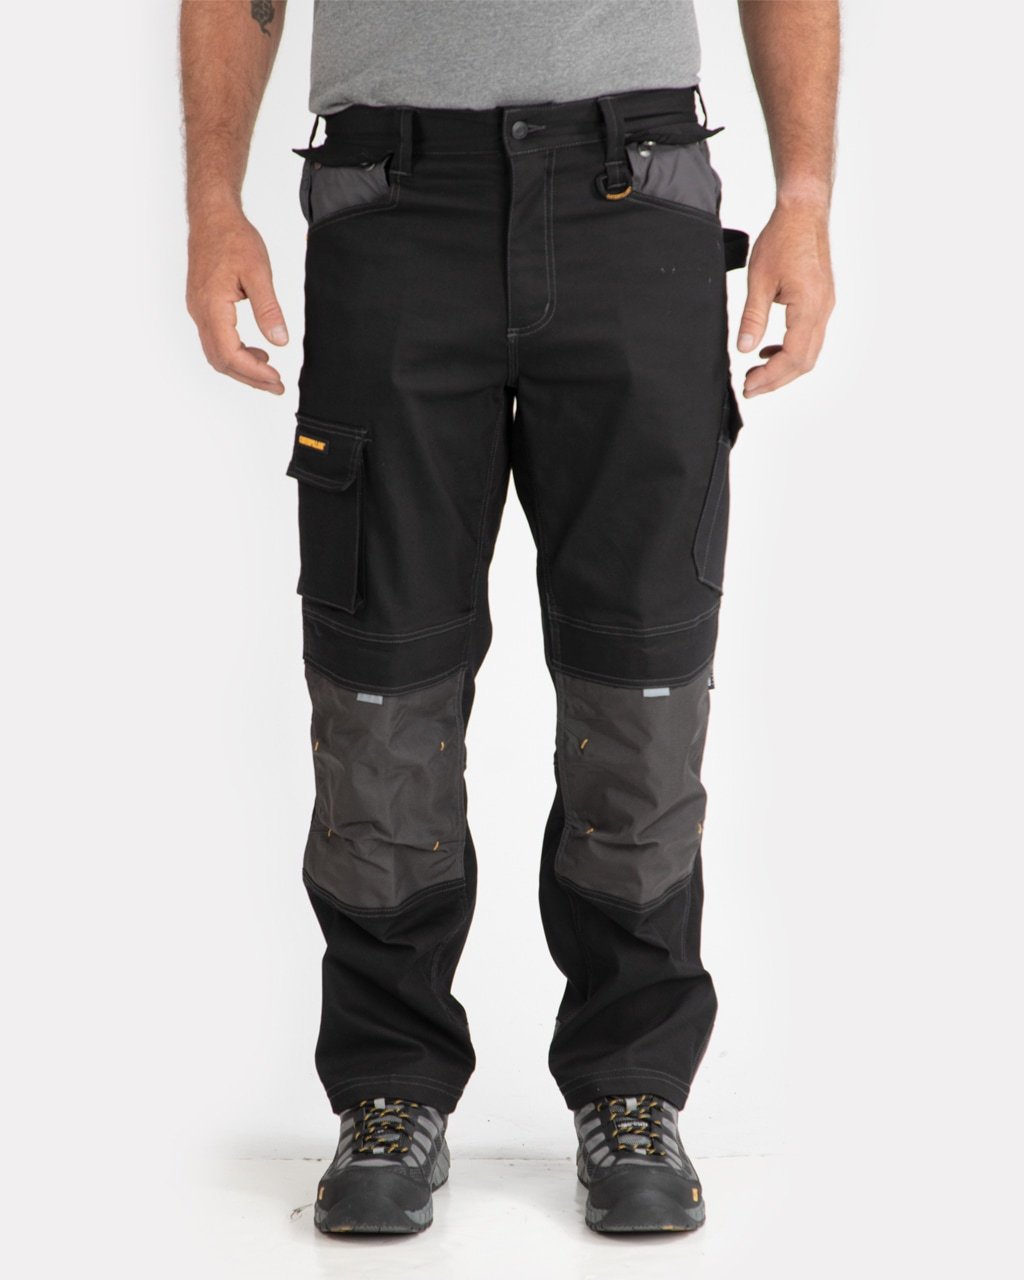 CAT H2O Defender Pant - Work World - Workwear, Work Boots, Safety Gear